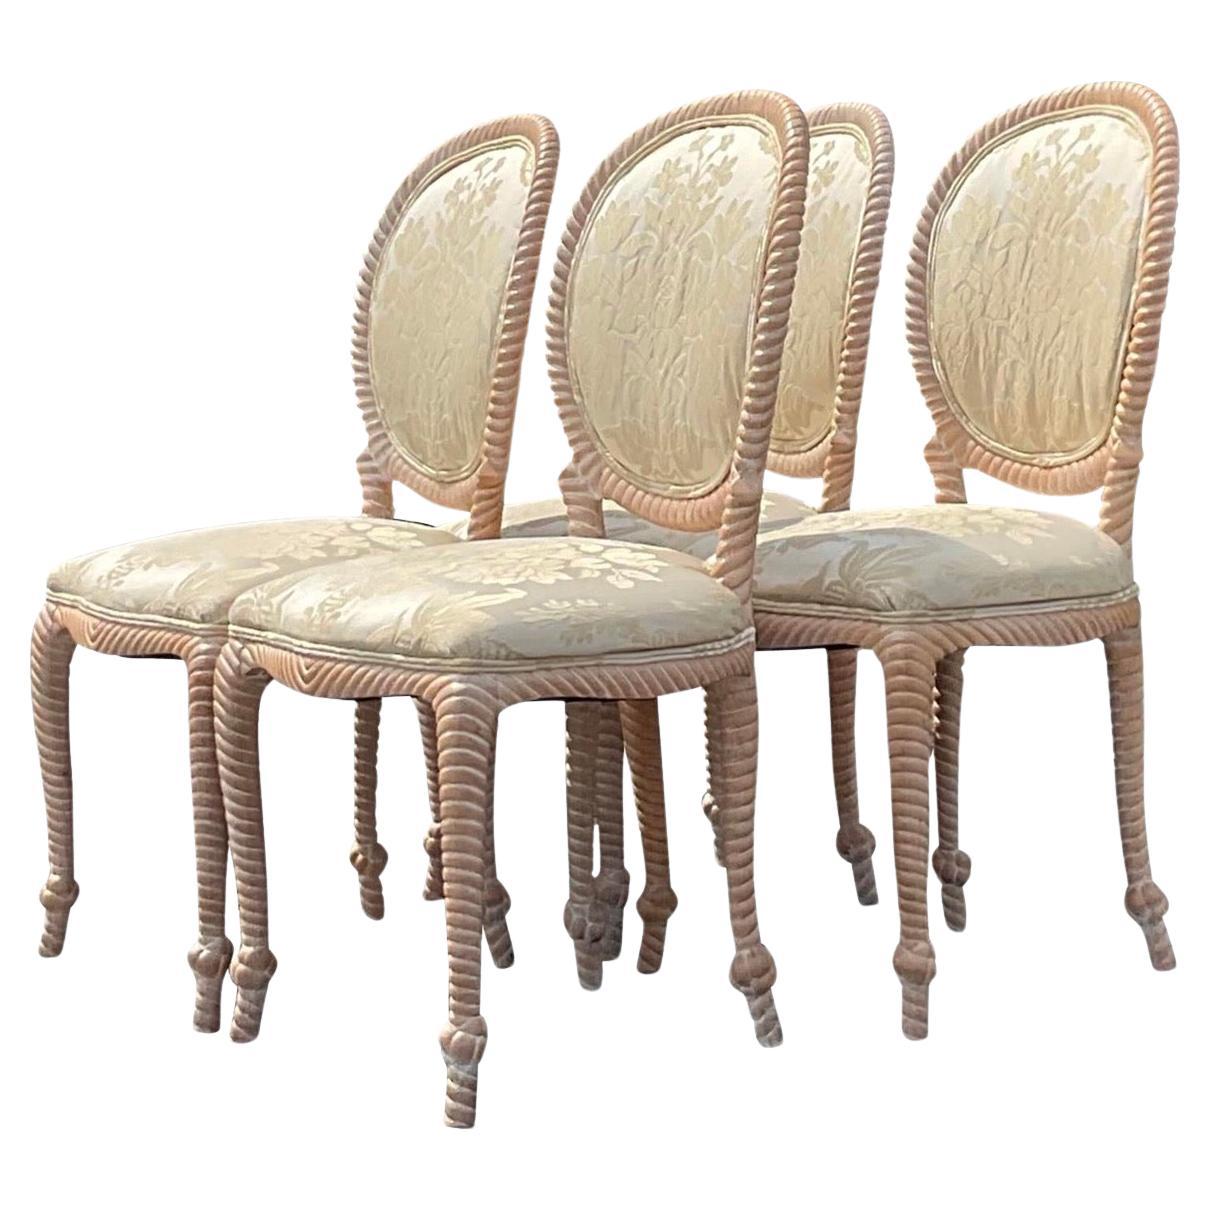 Vintage Coastal Carved Rope Dining Chairs - Set of 4